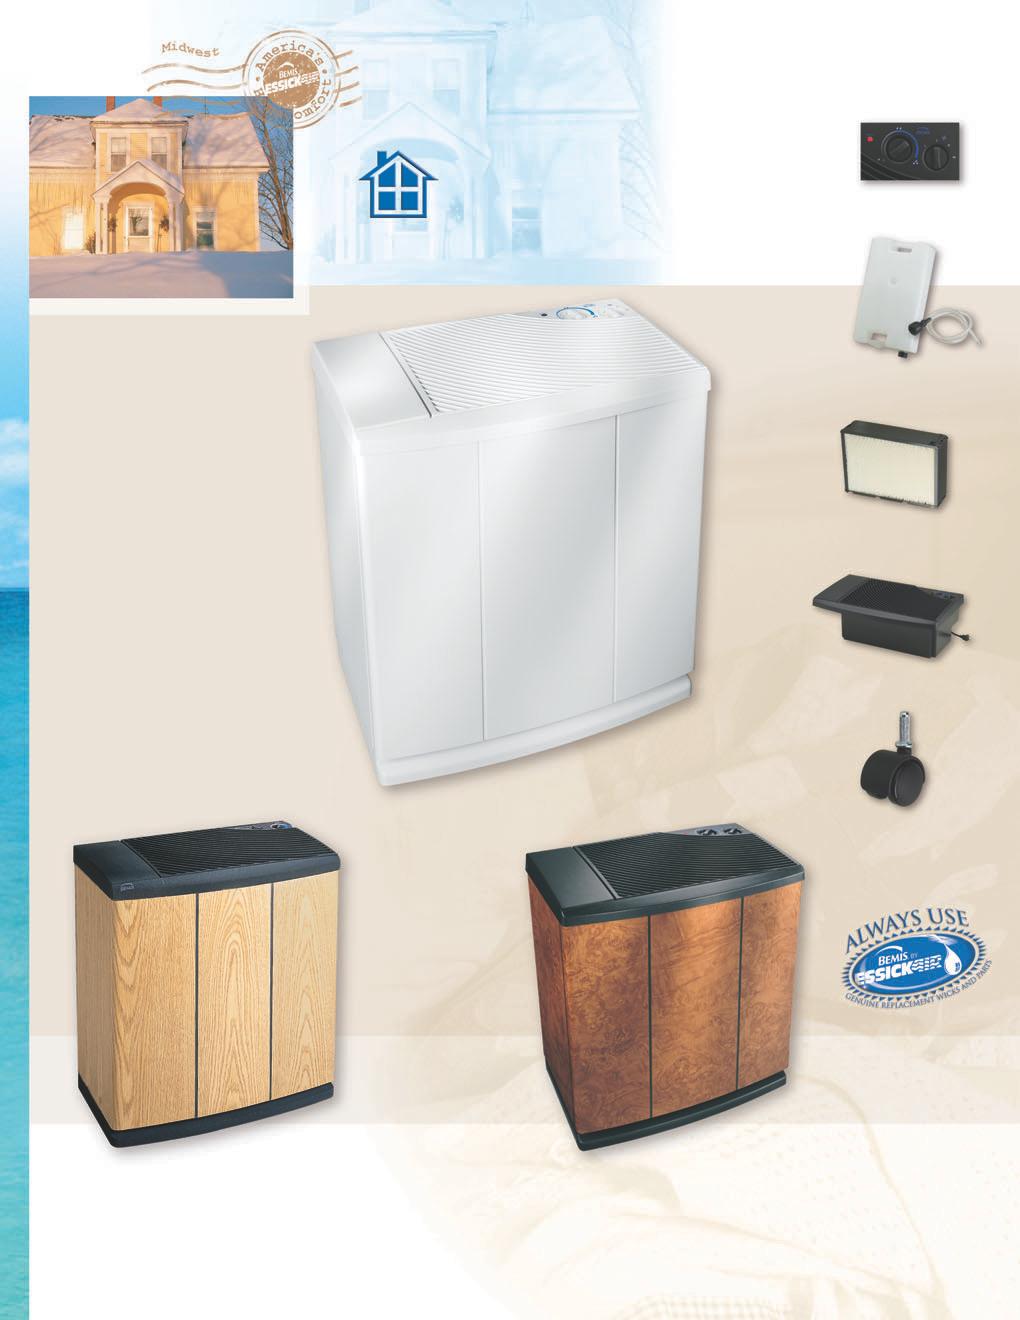 Your customers will appreciate full-size performance in a midsize humidifier.